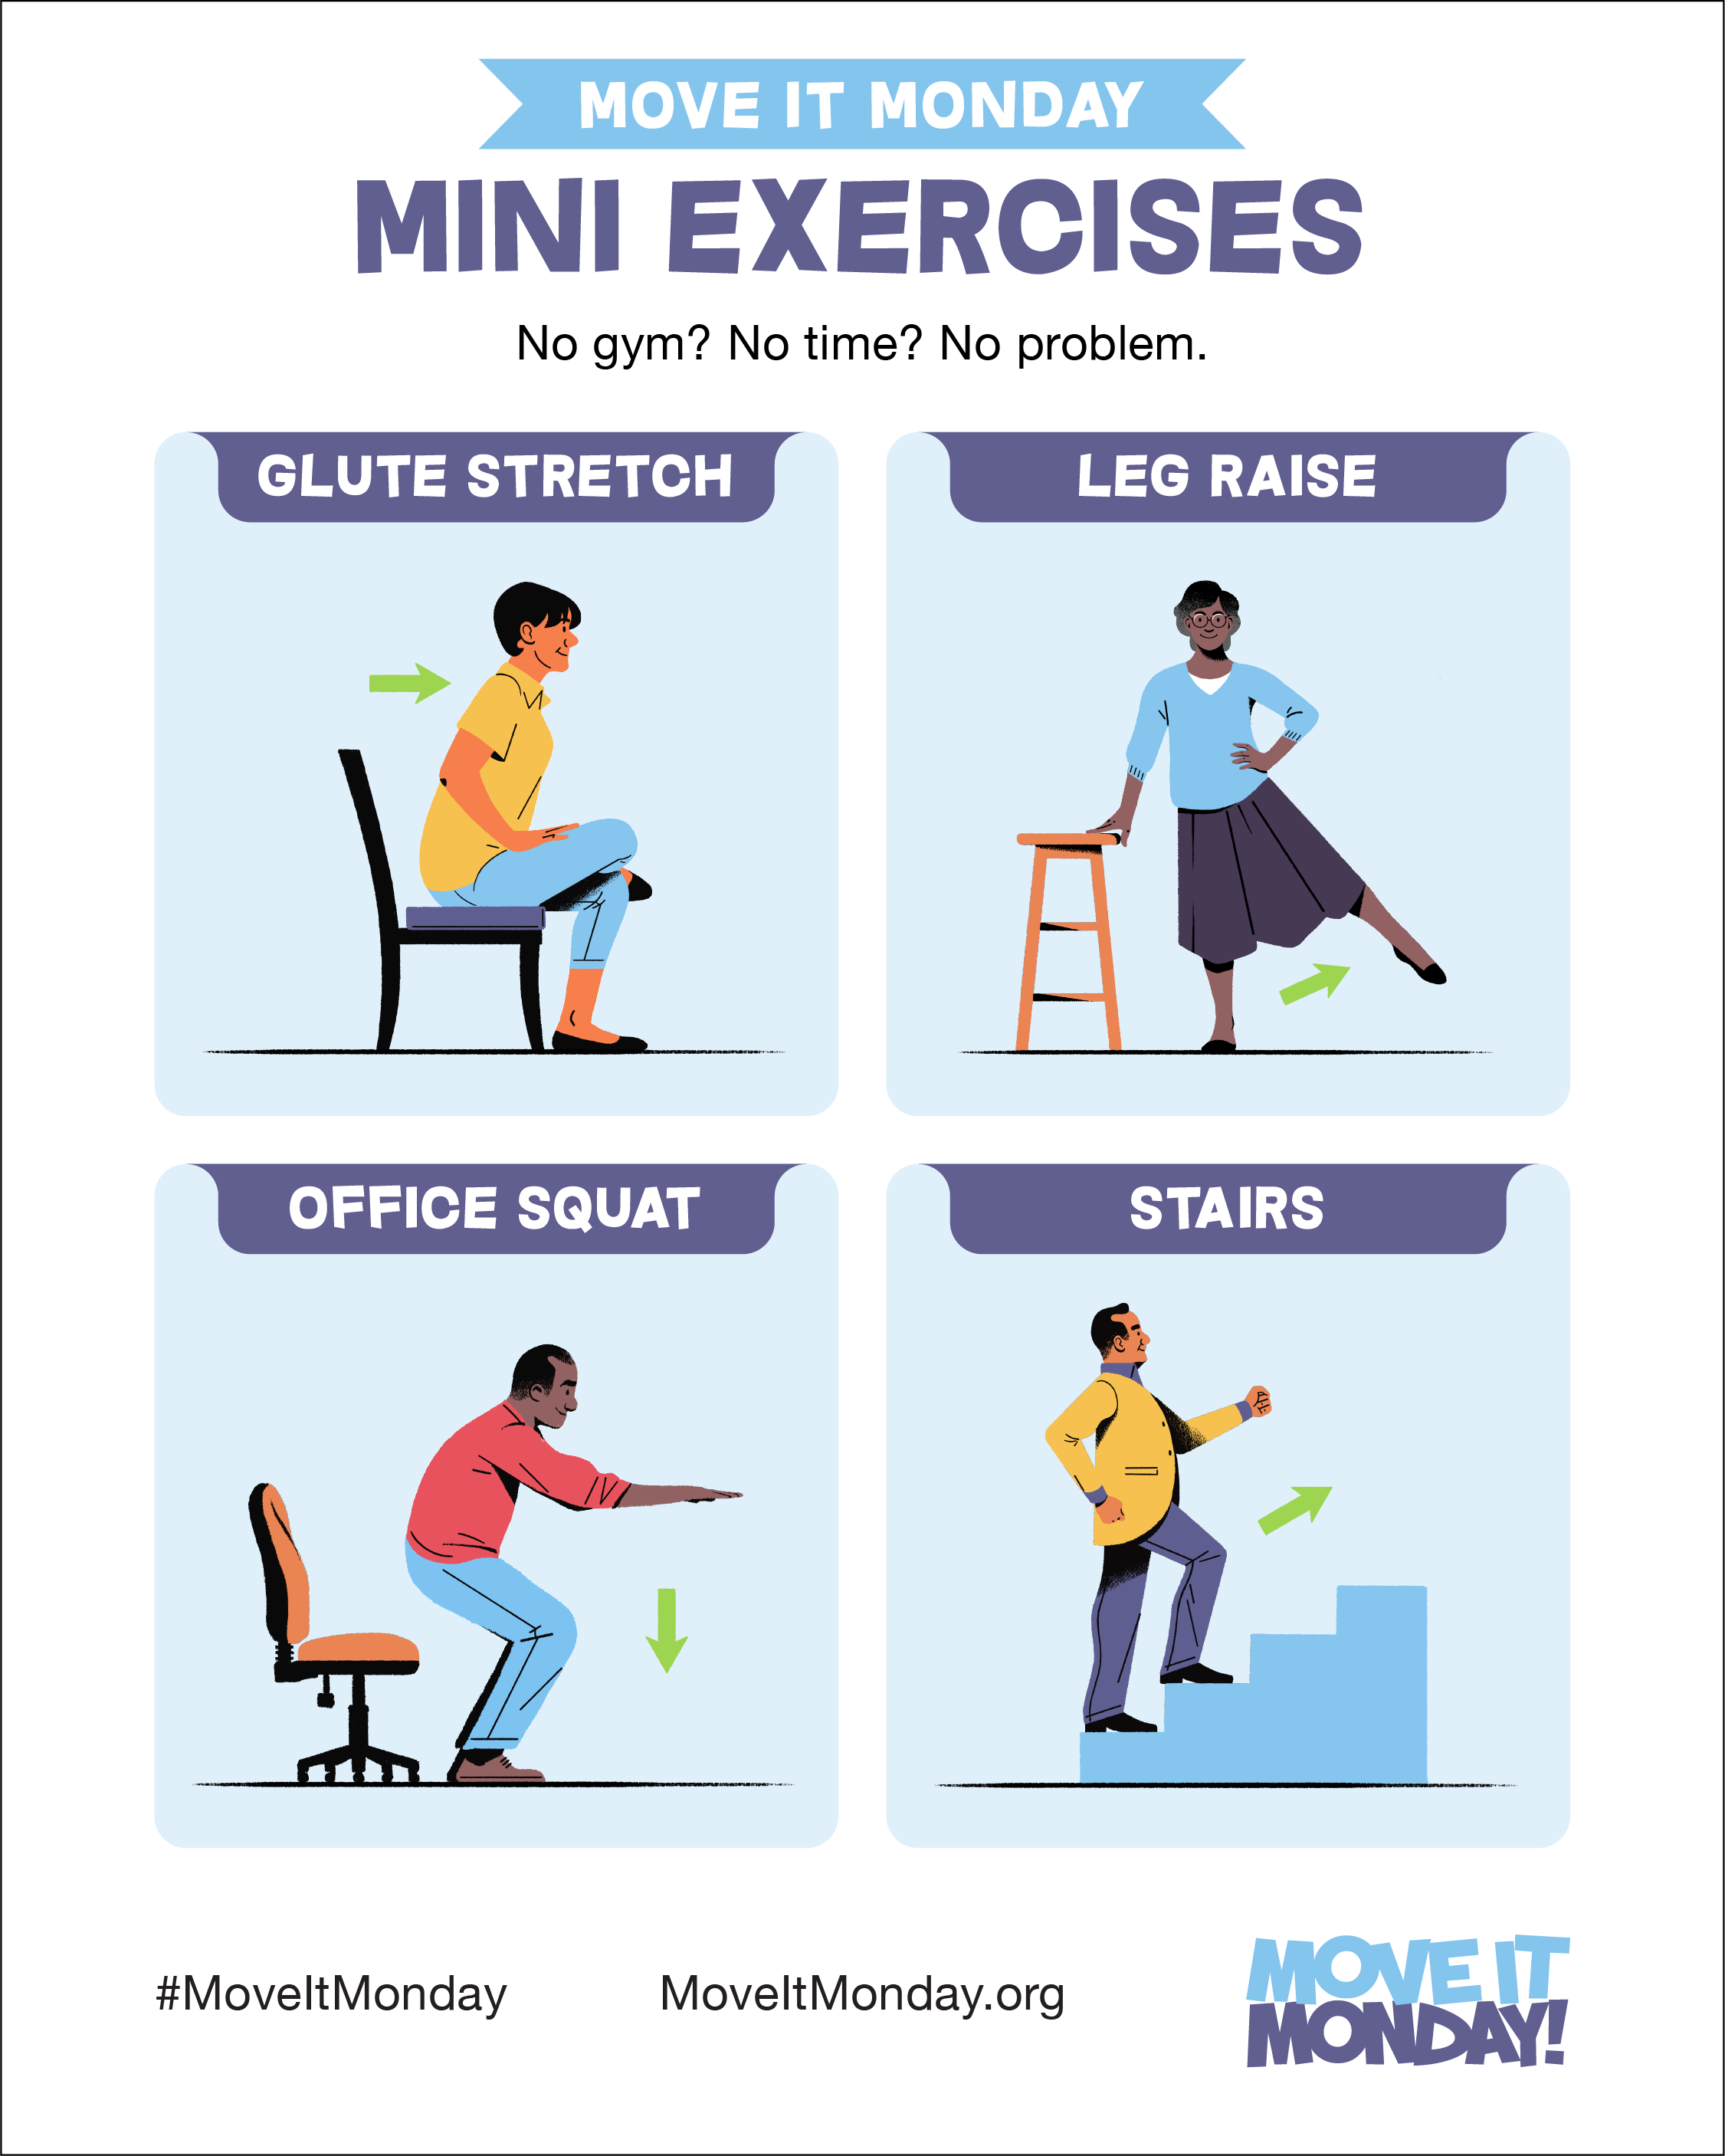 Work Out Anywhere for Move It Monday with these Simple Mini Exercises